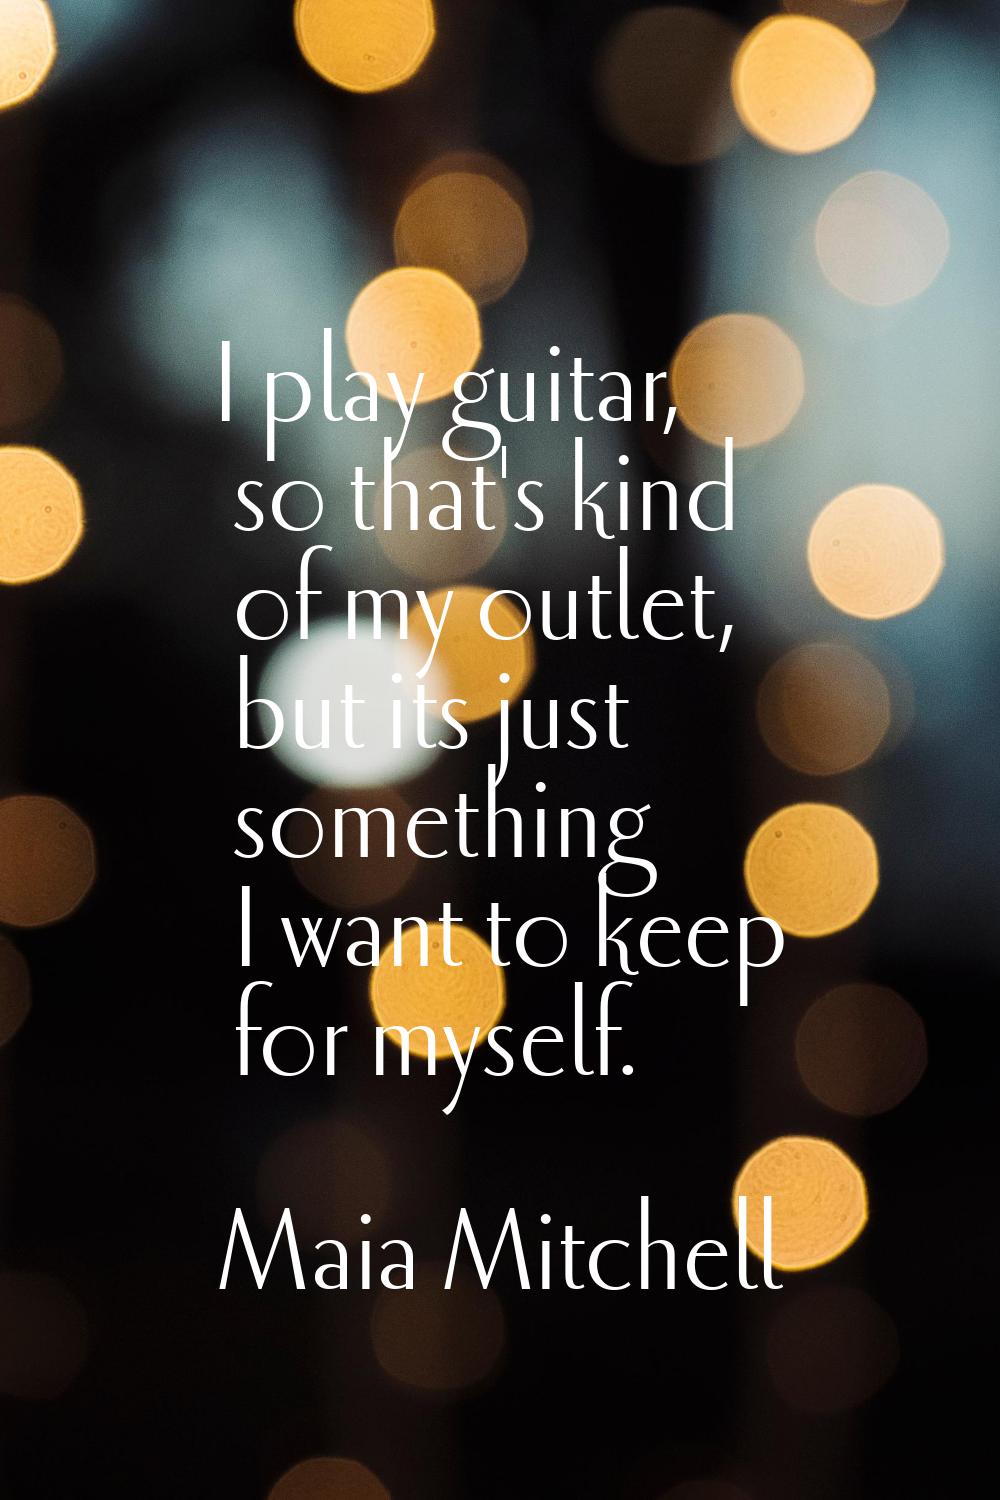 I play guitar, so that's kind of my outlet, but its just something I want to keep for myself.